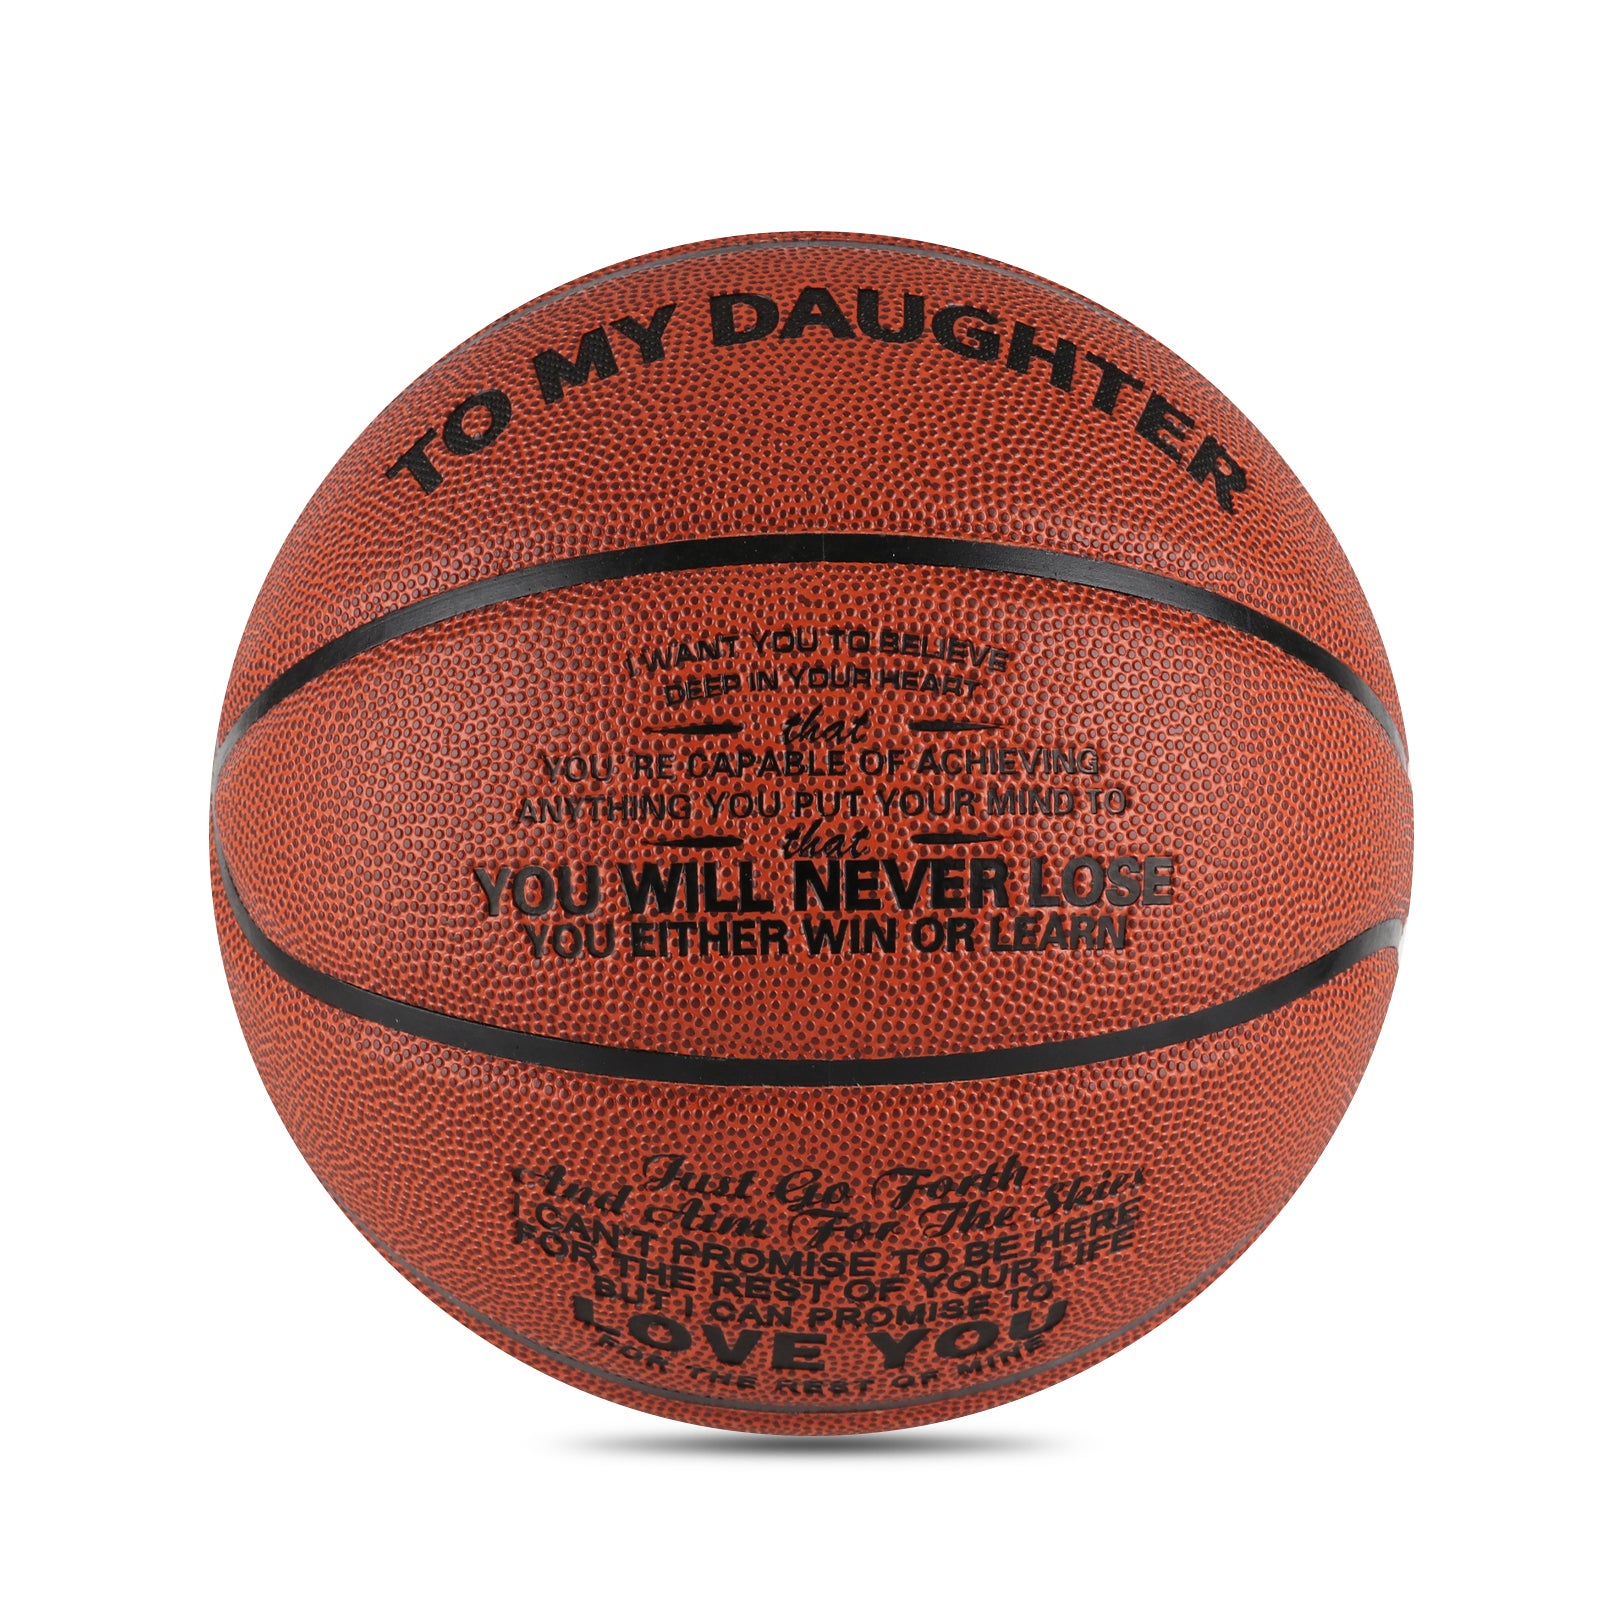 Personalized Letter Basketball For Daughter From Mom, Basketball Indoor/Outdoor Game Ball For Girl, Birthday Christmas Gift For Daughter From Mom